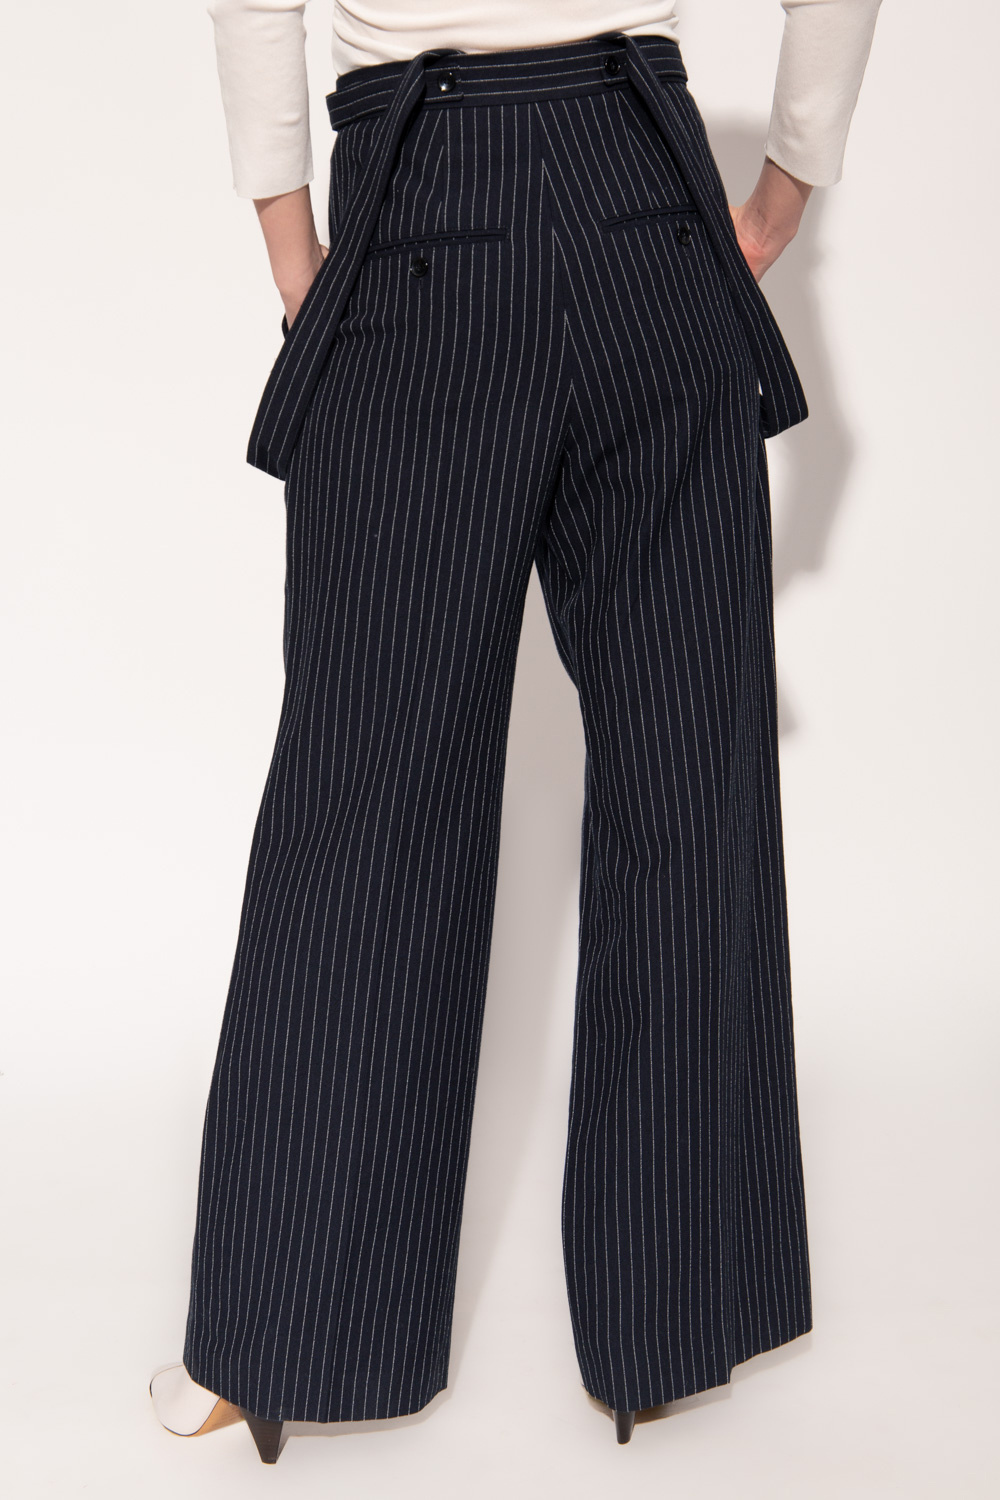 Isabel Marant ’Jessica’ leg trousers with suspenders